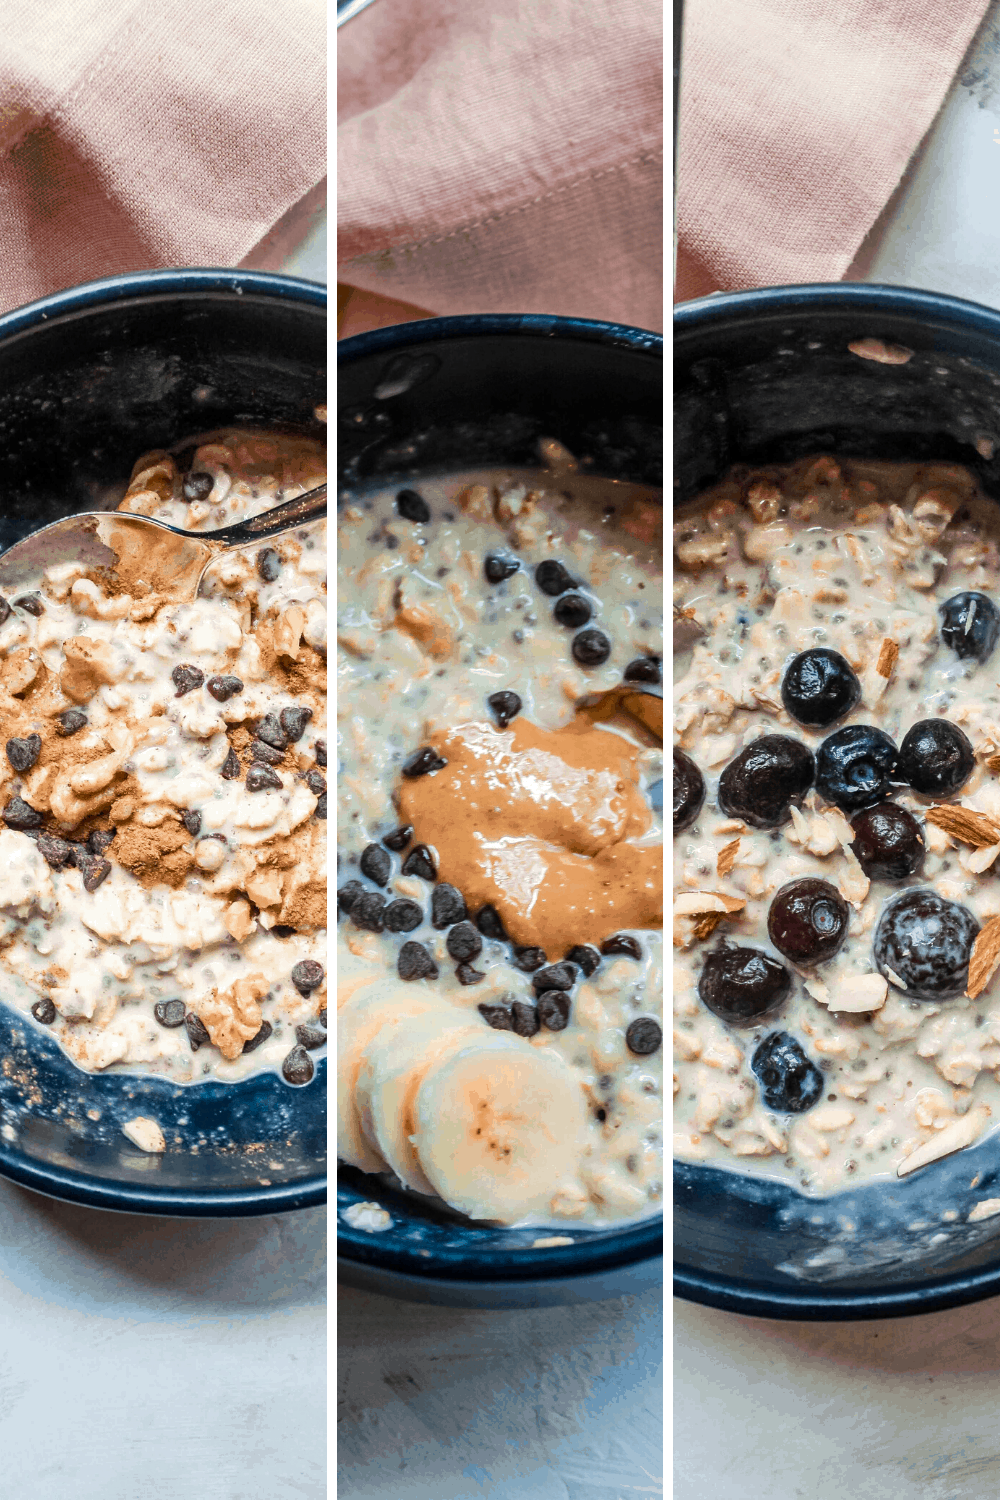 Meal prep your breakfast once by making overnight oats in a jar with three different toppings! It’s a healthy, clean, and easy way to make breakfast! #overnightoats #oatmeal #cleanbreakfast